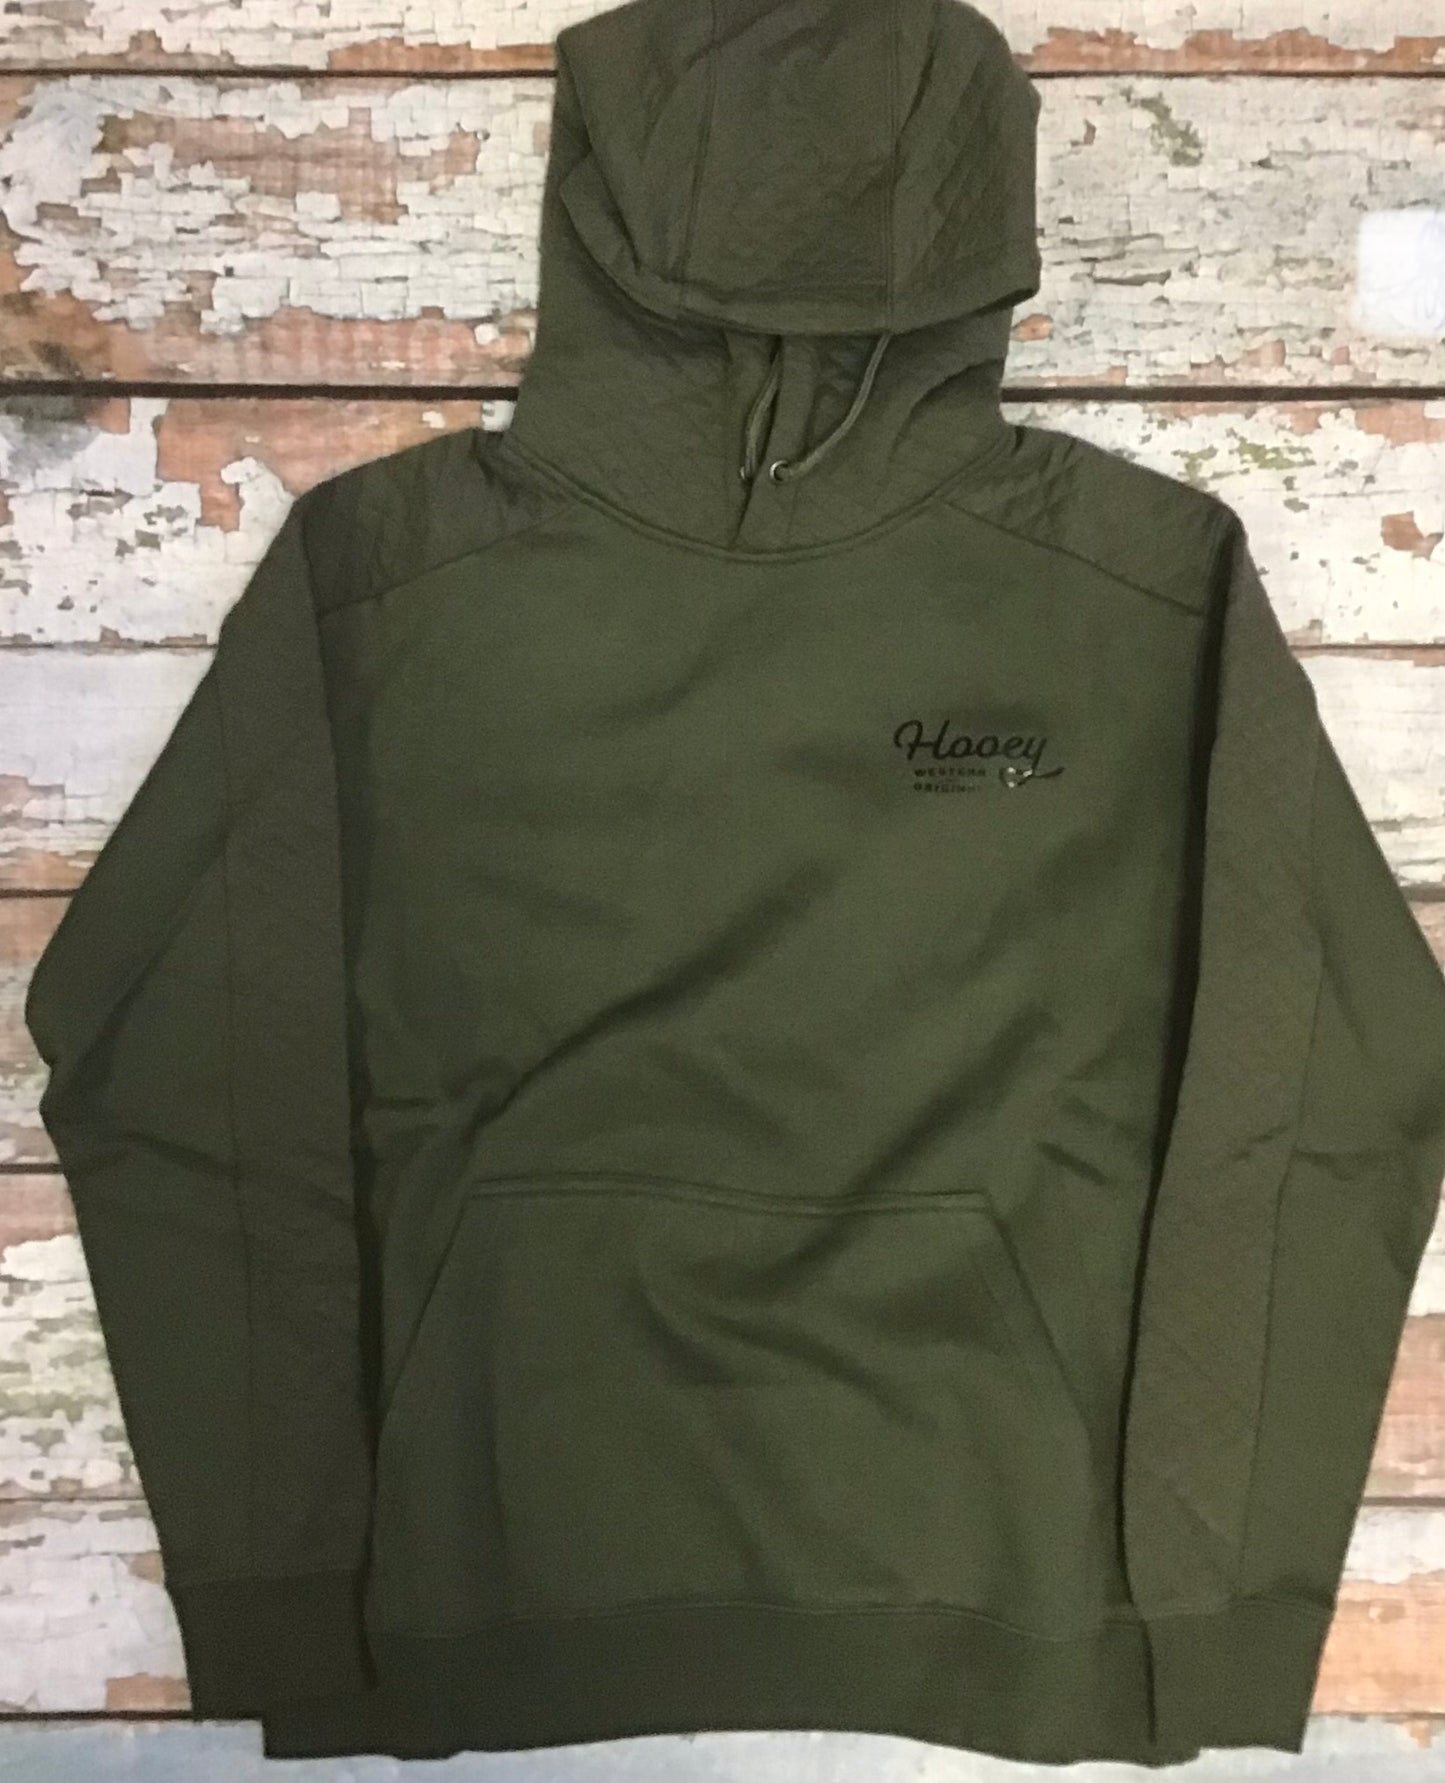 Outerwear Men’s Hooey Canyon Olive Green Hoody HH1230OL